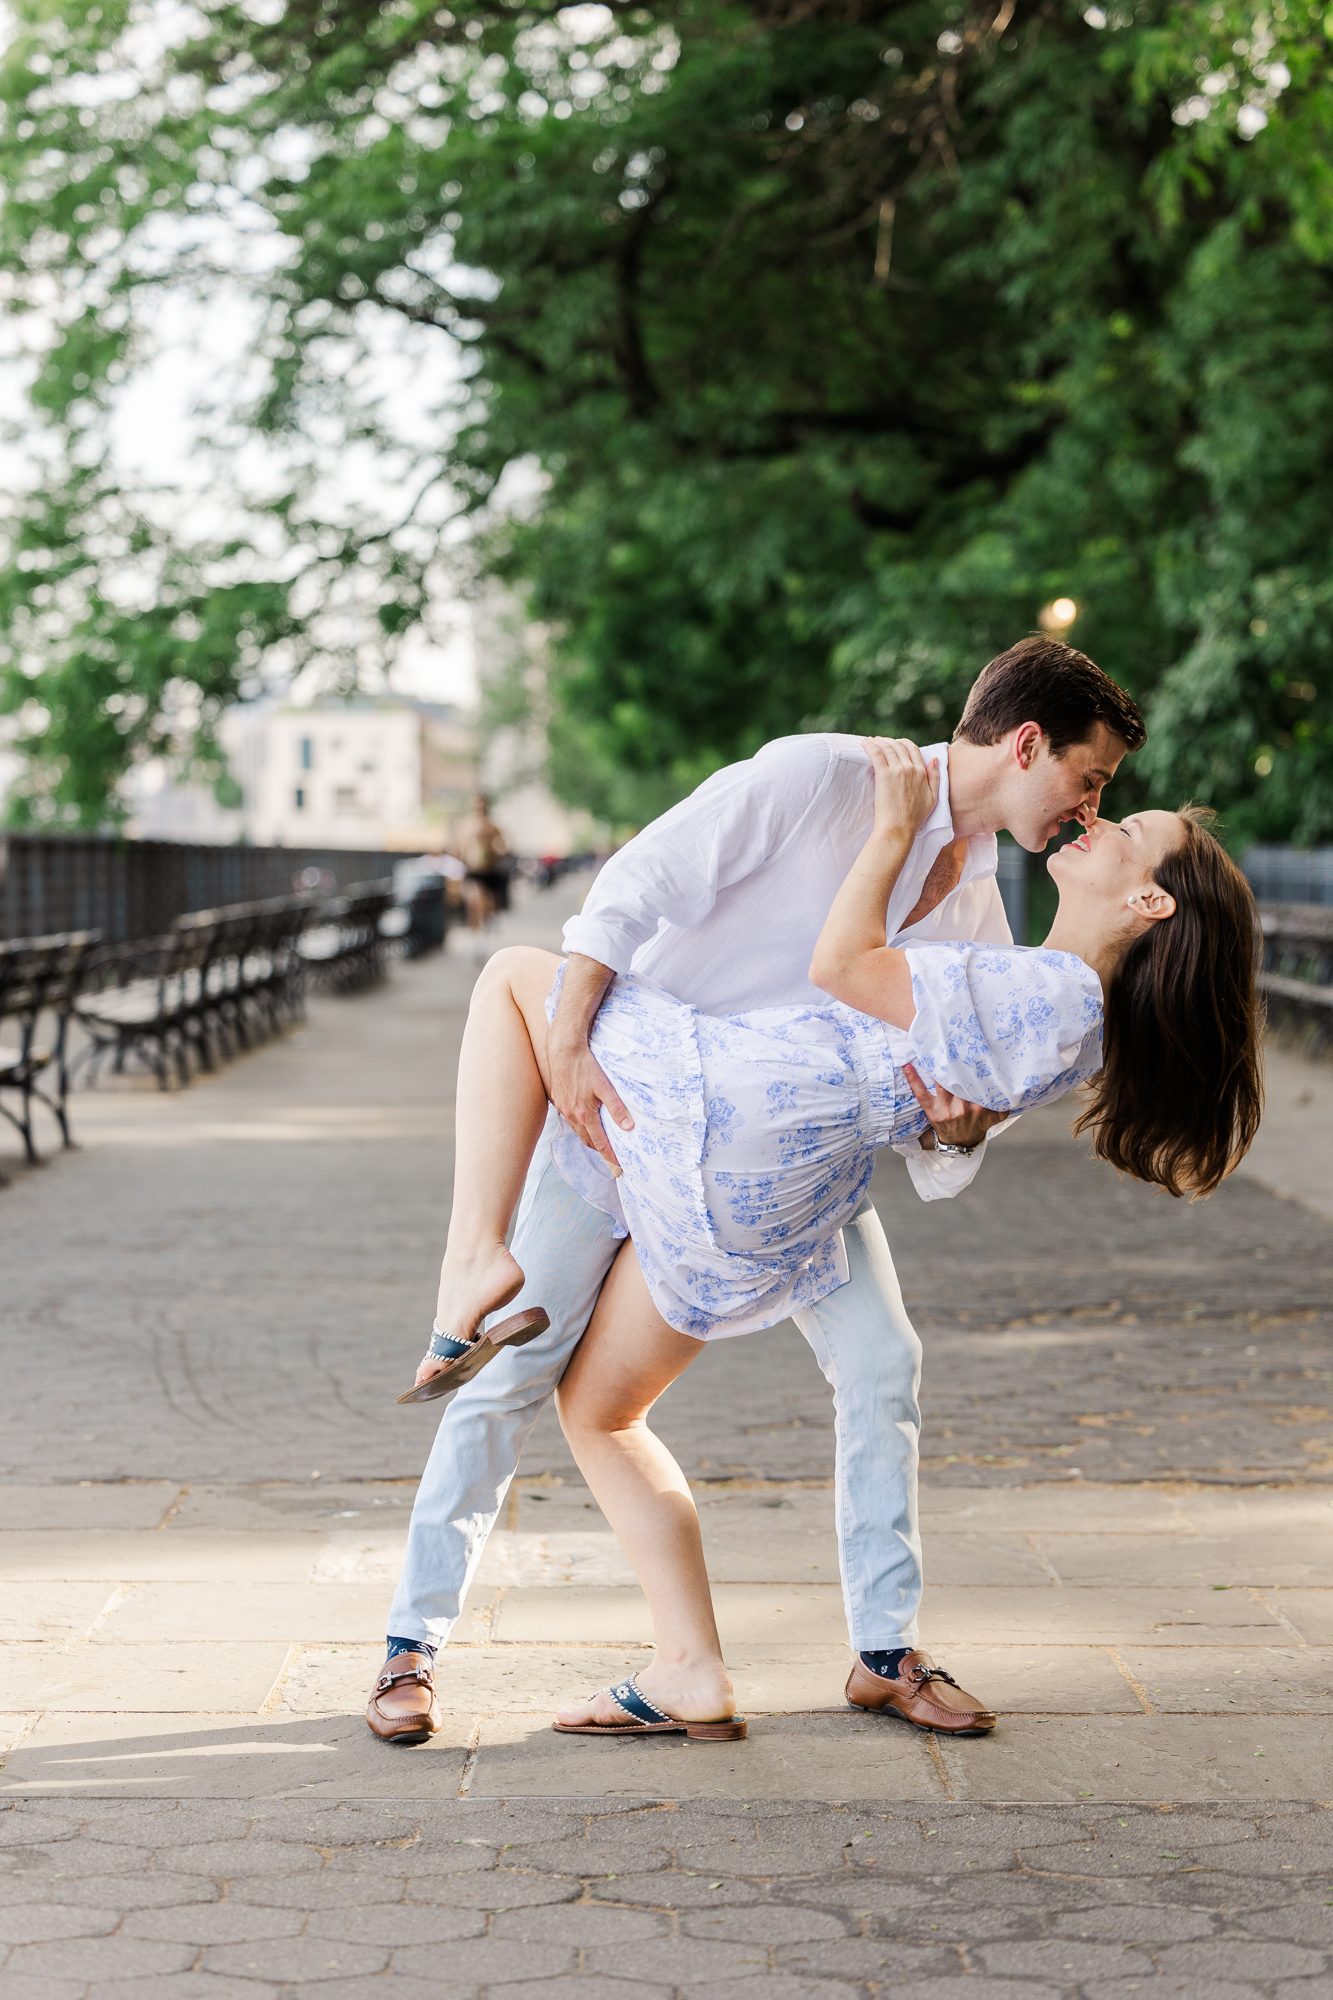 Charming Brooklyn Heights Engagement Photos